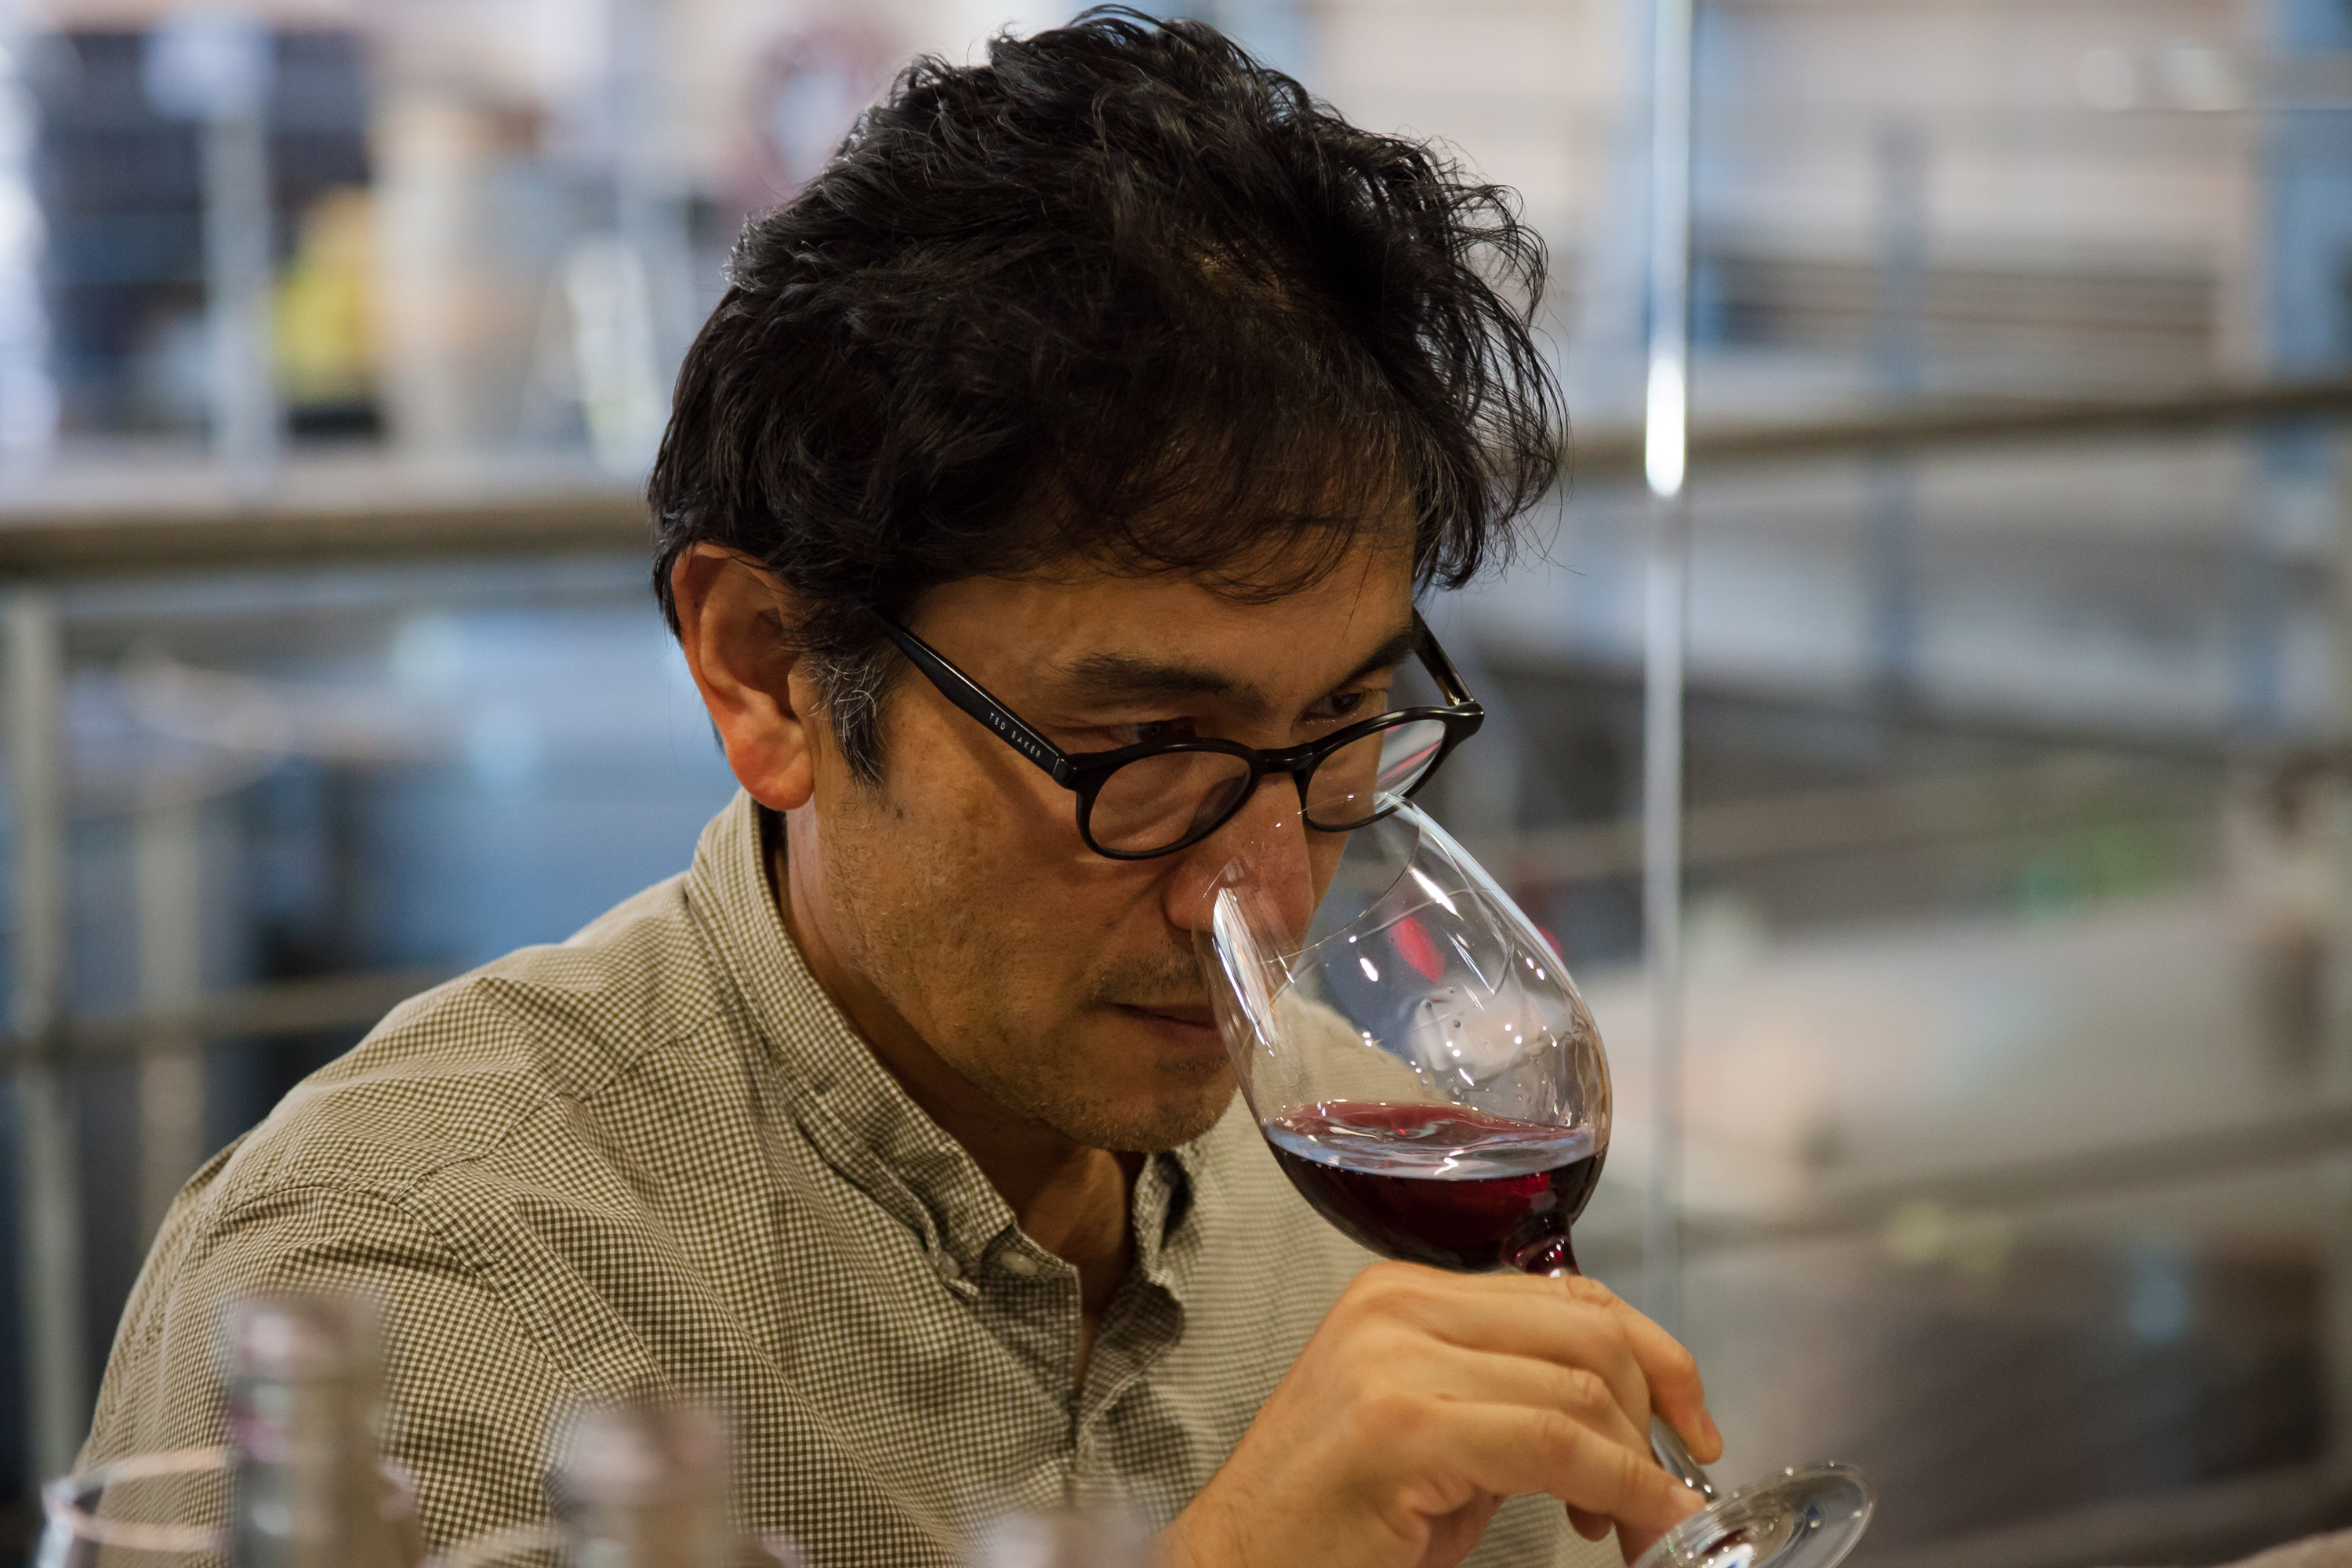 Byron searches for inner peace in the glass. Actually, he’s tasting our Pinot Noir to decide the final blend for Alazan.